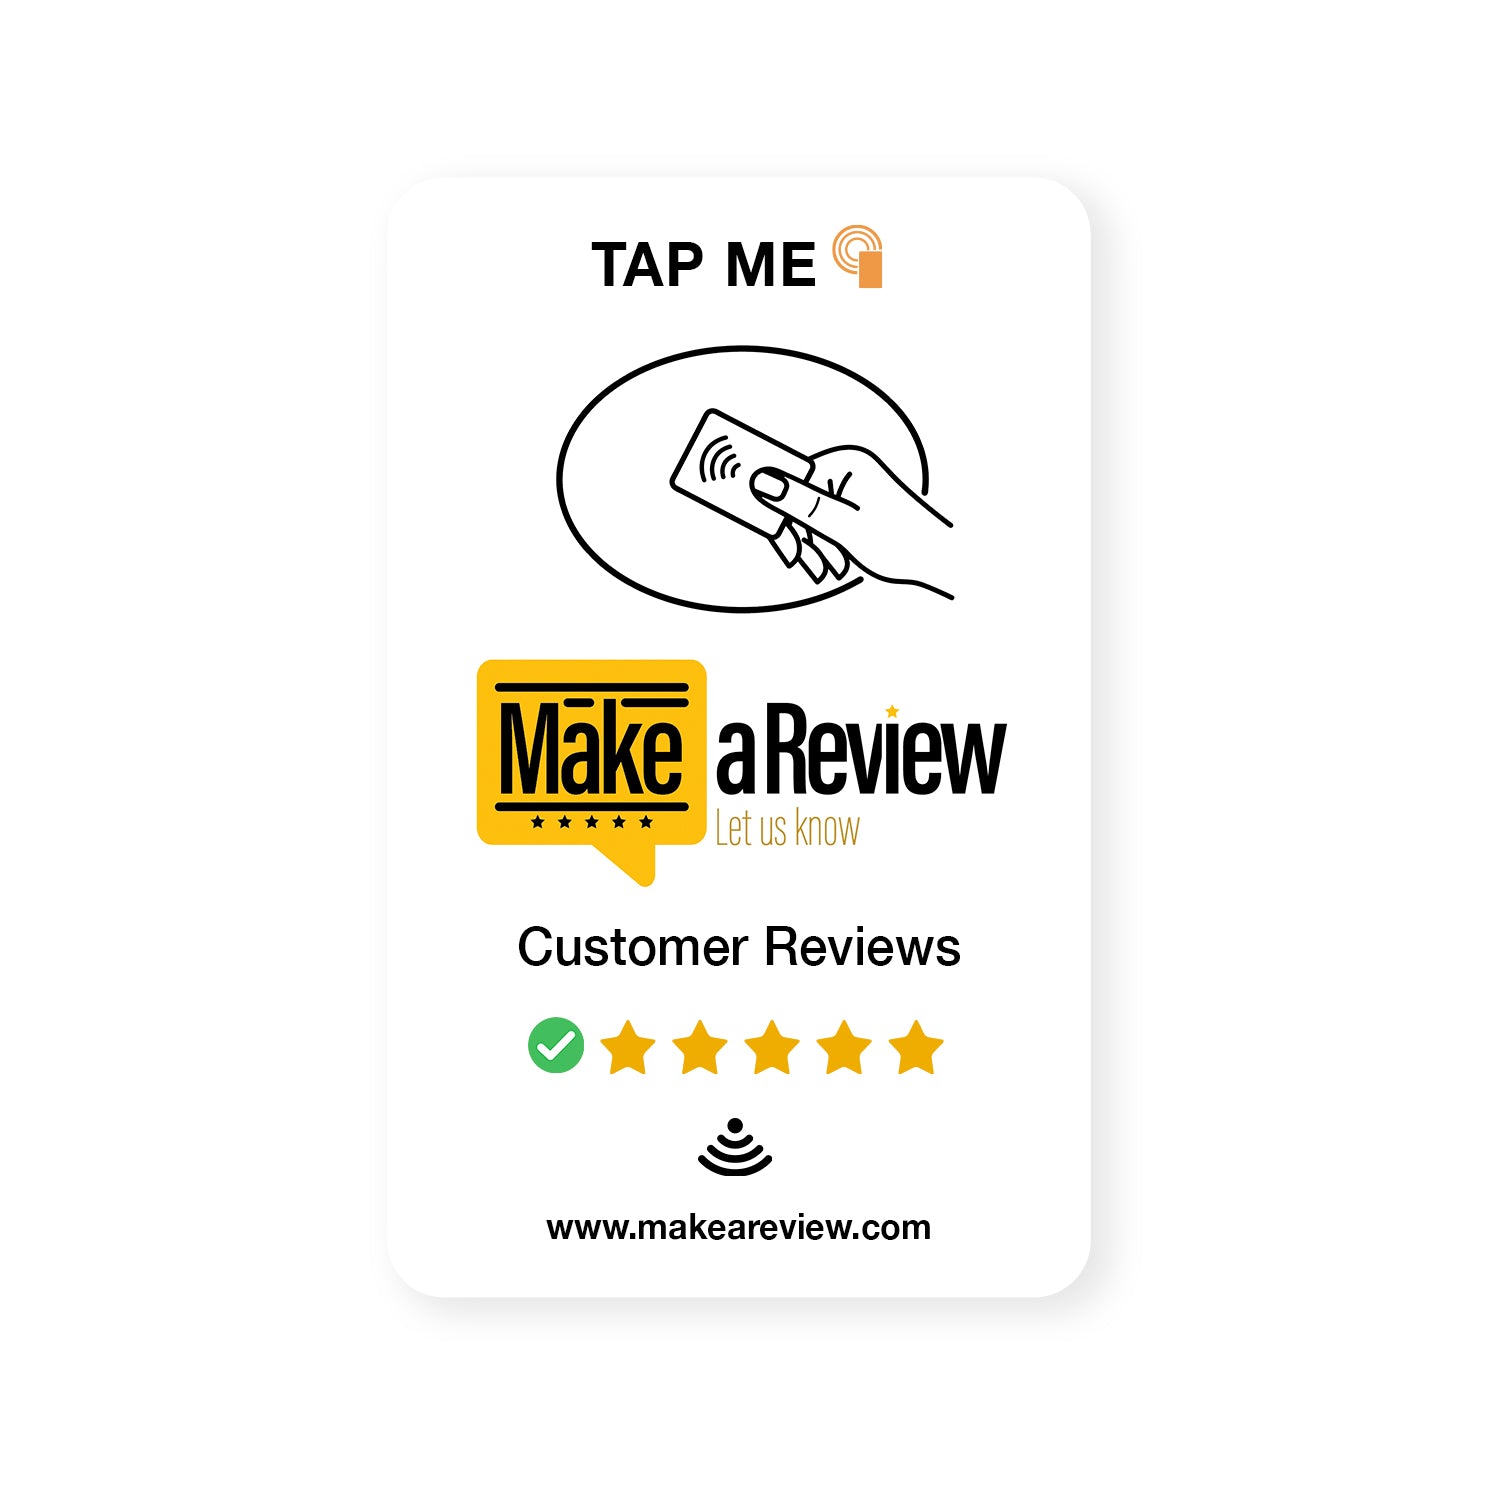 Review Card